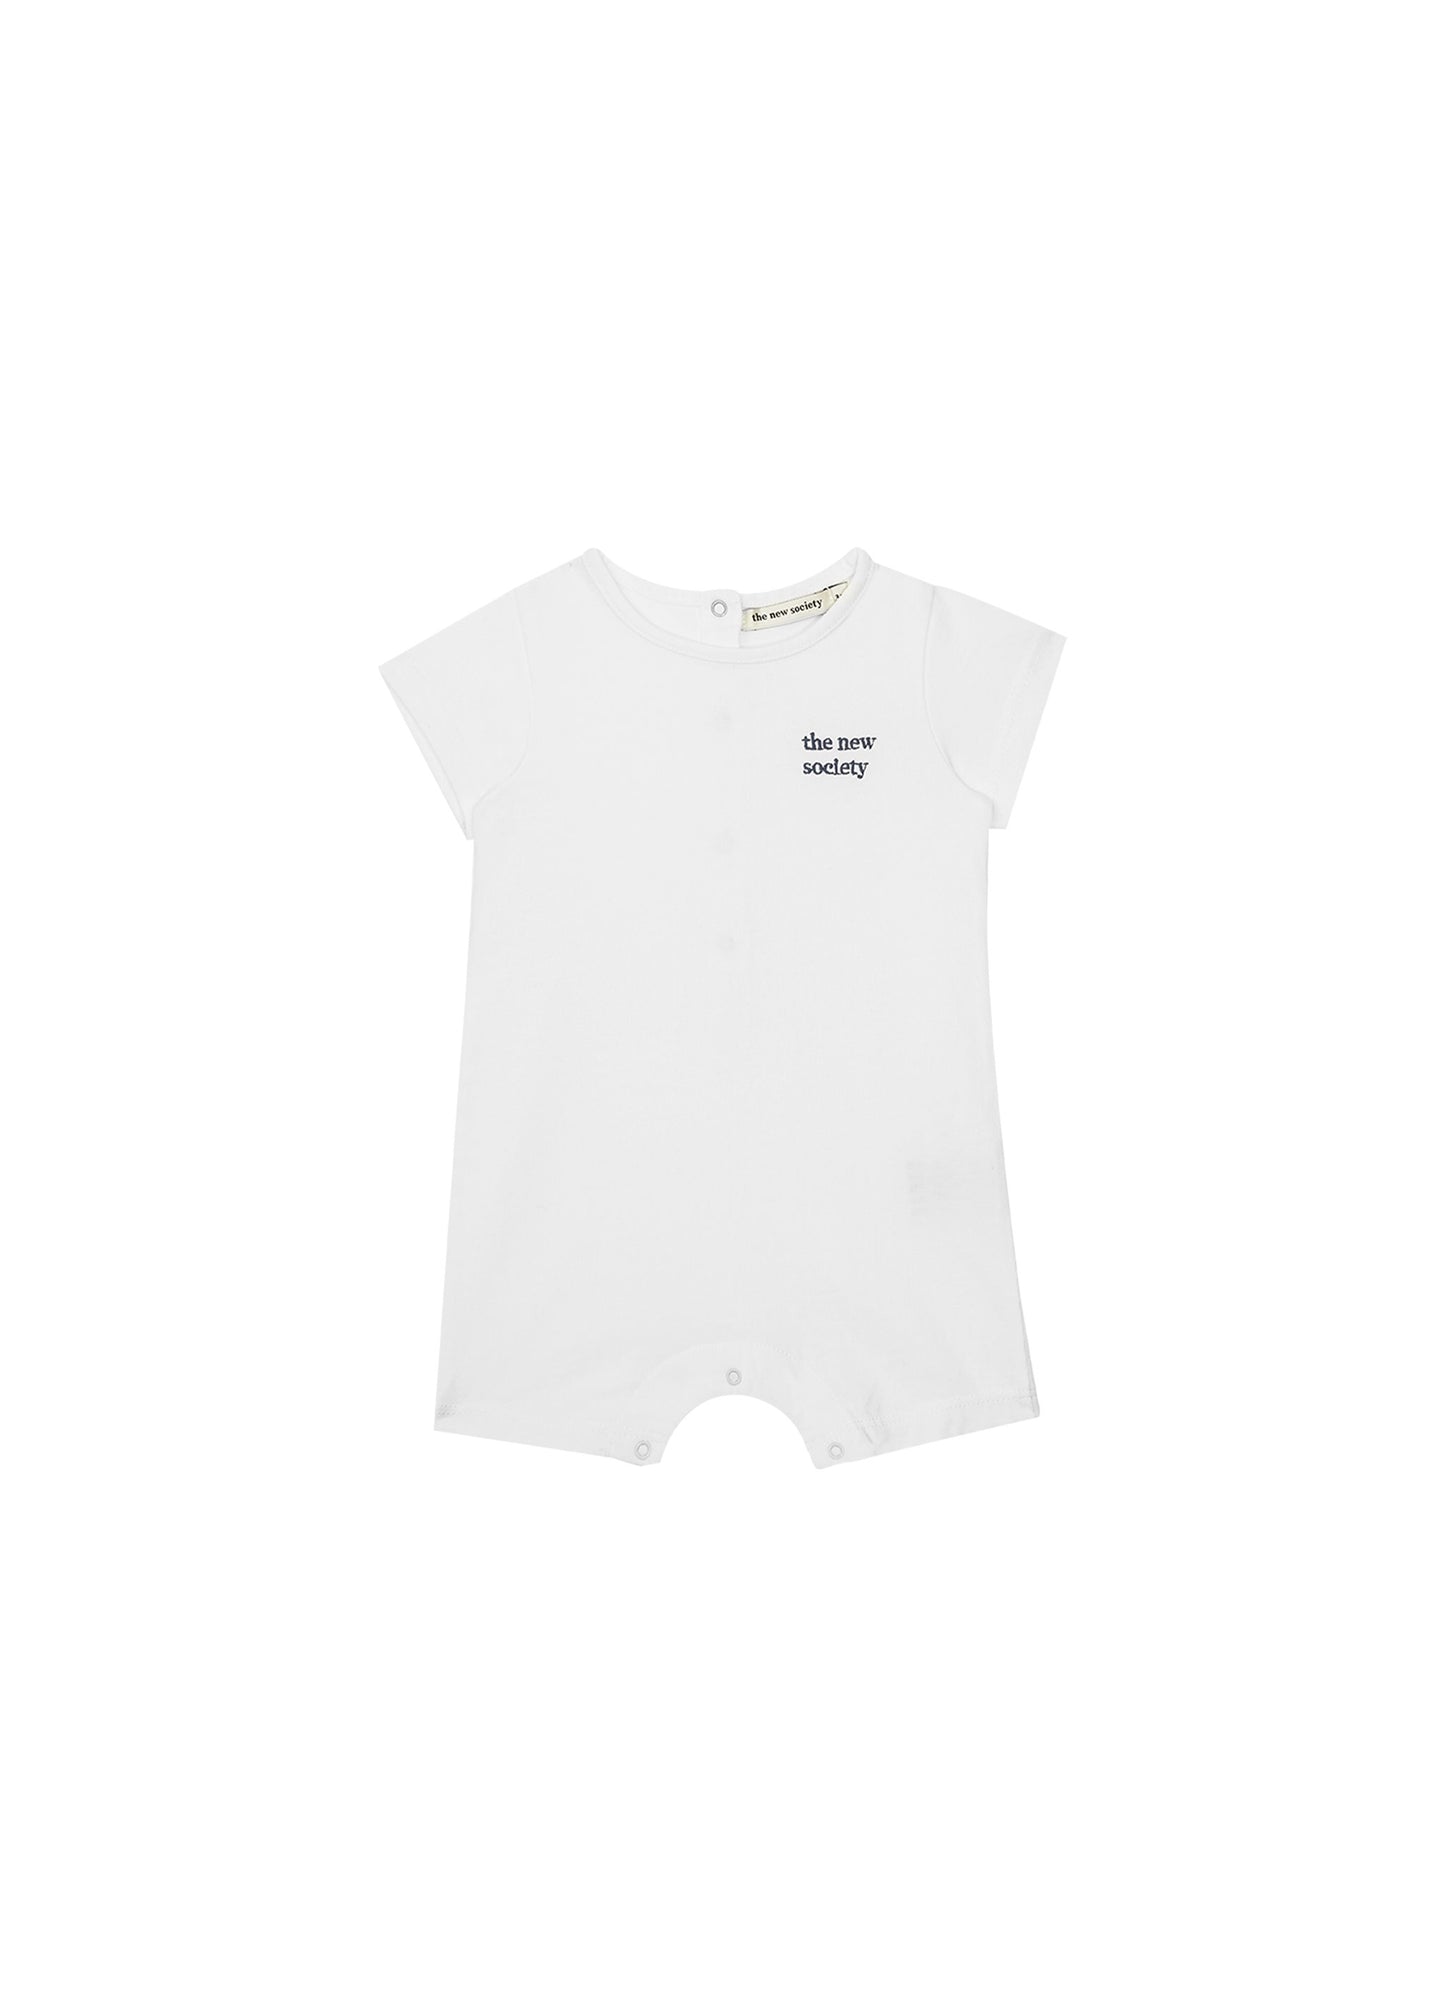 Logo Embroidery Baby Romper Baby Grows The New Society 